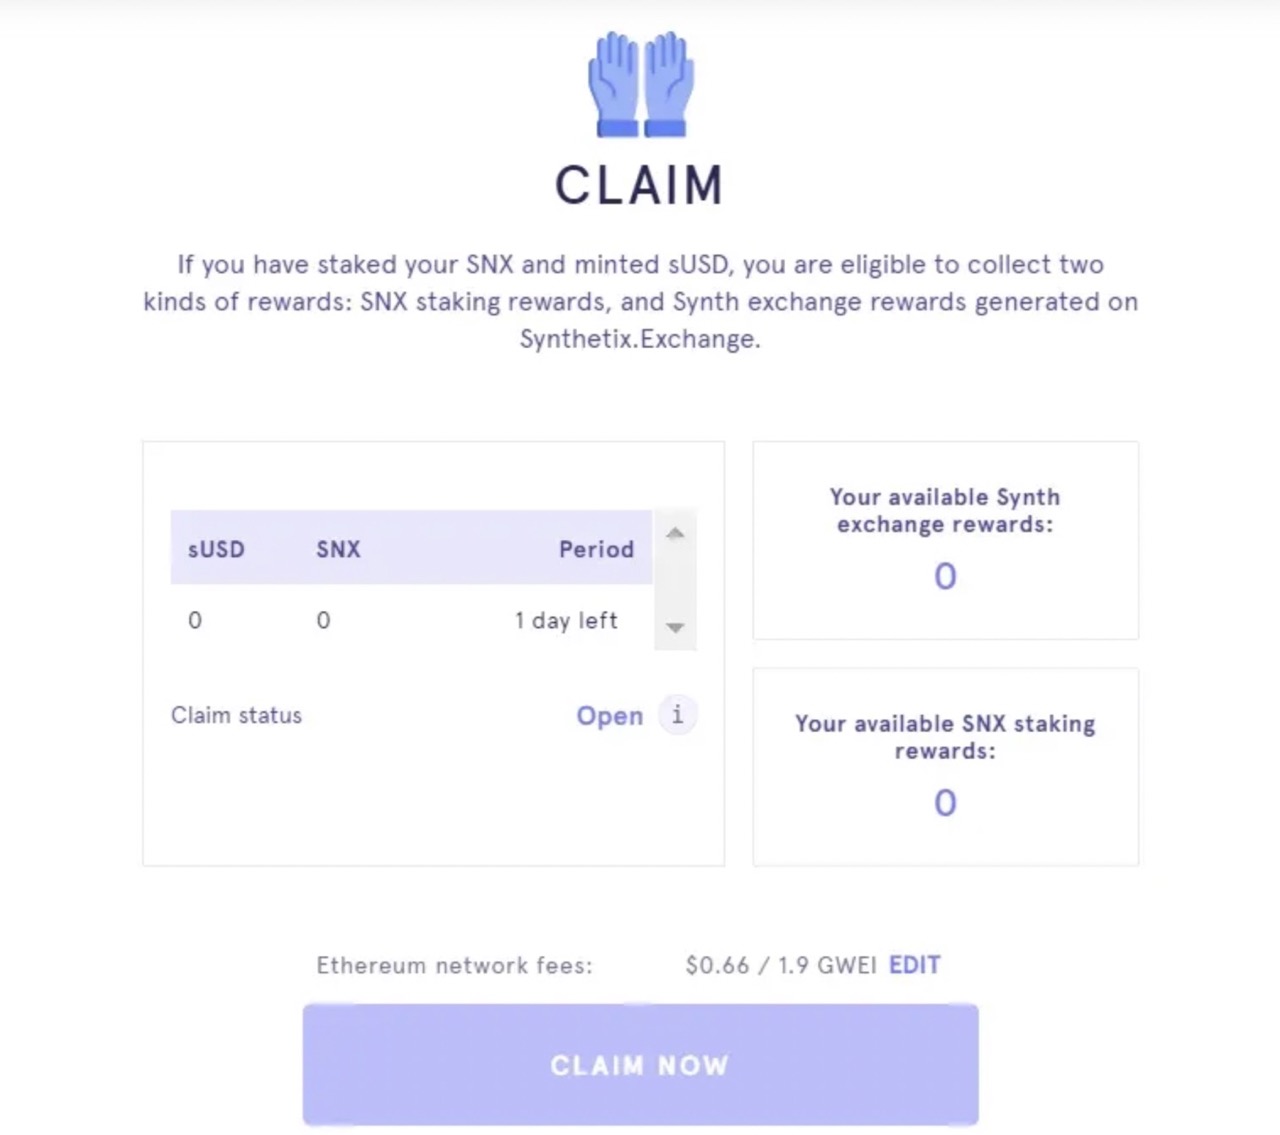 Claiming your SNX staking rewards on Mintr